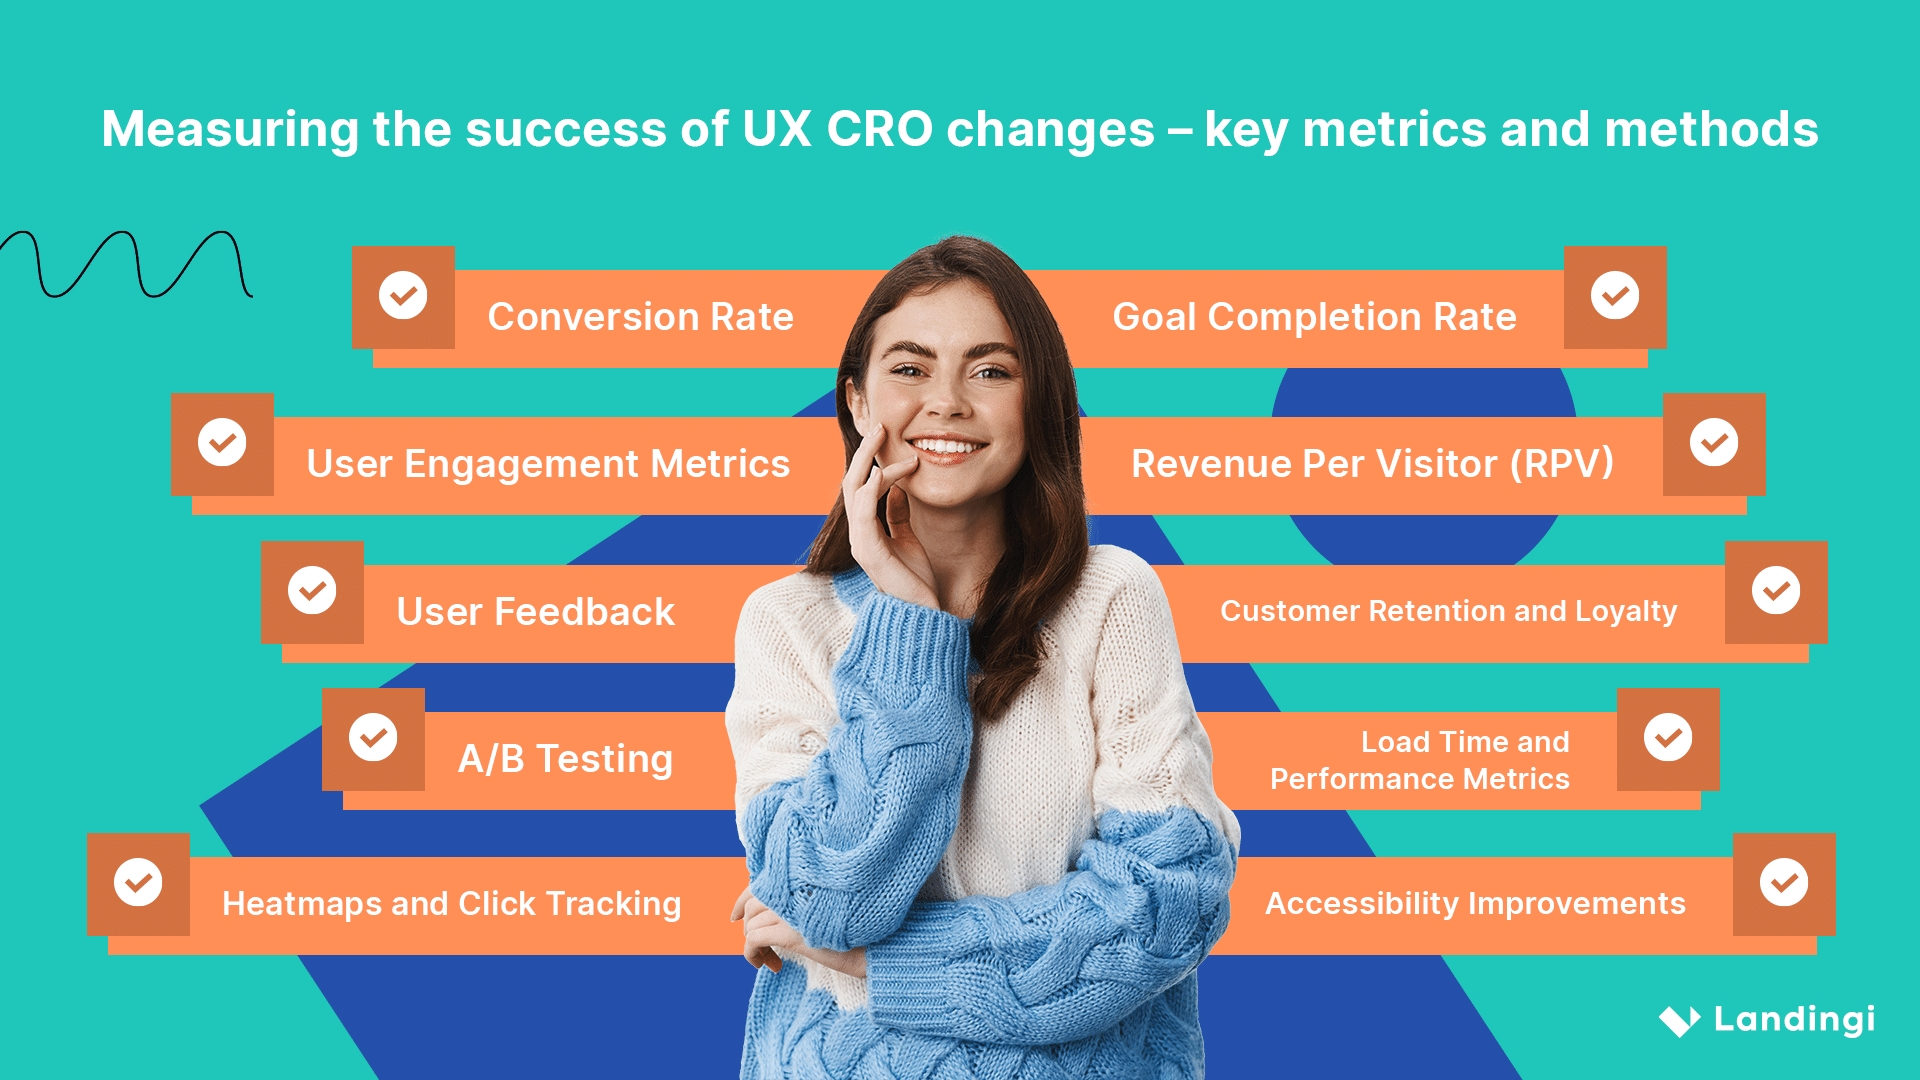 Metrics and methods to measure success of UX CRO changes